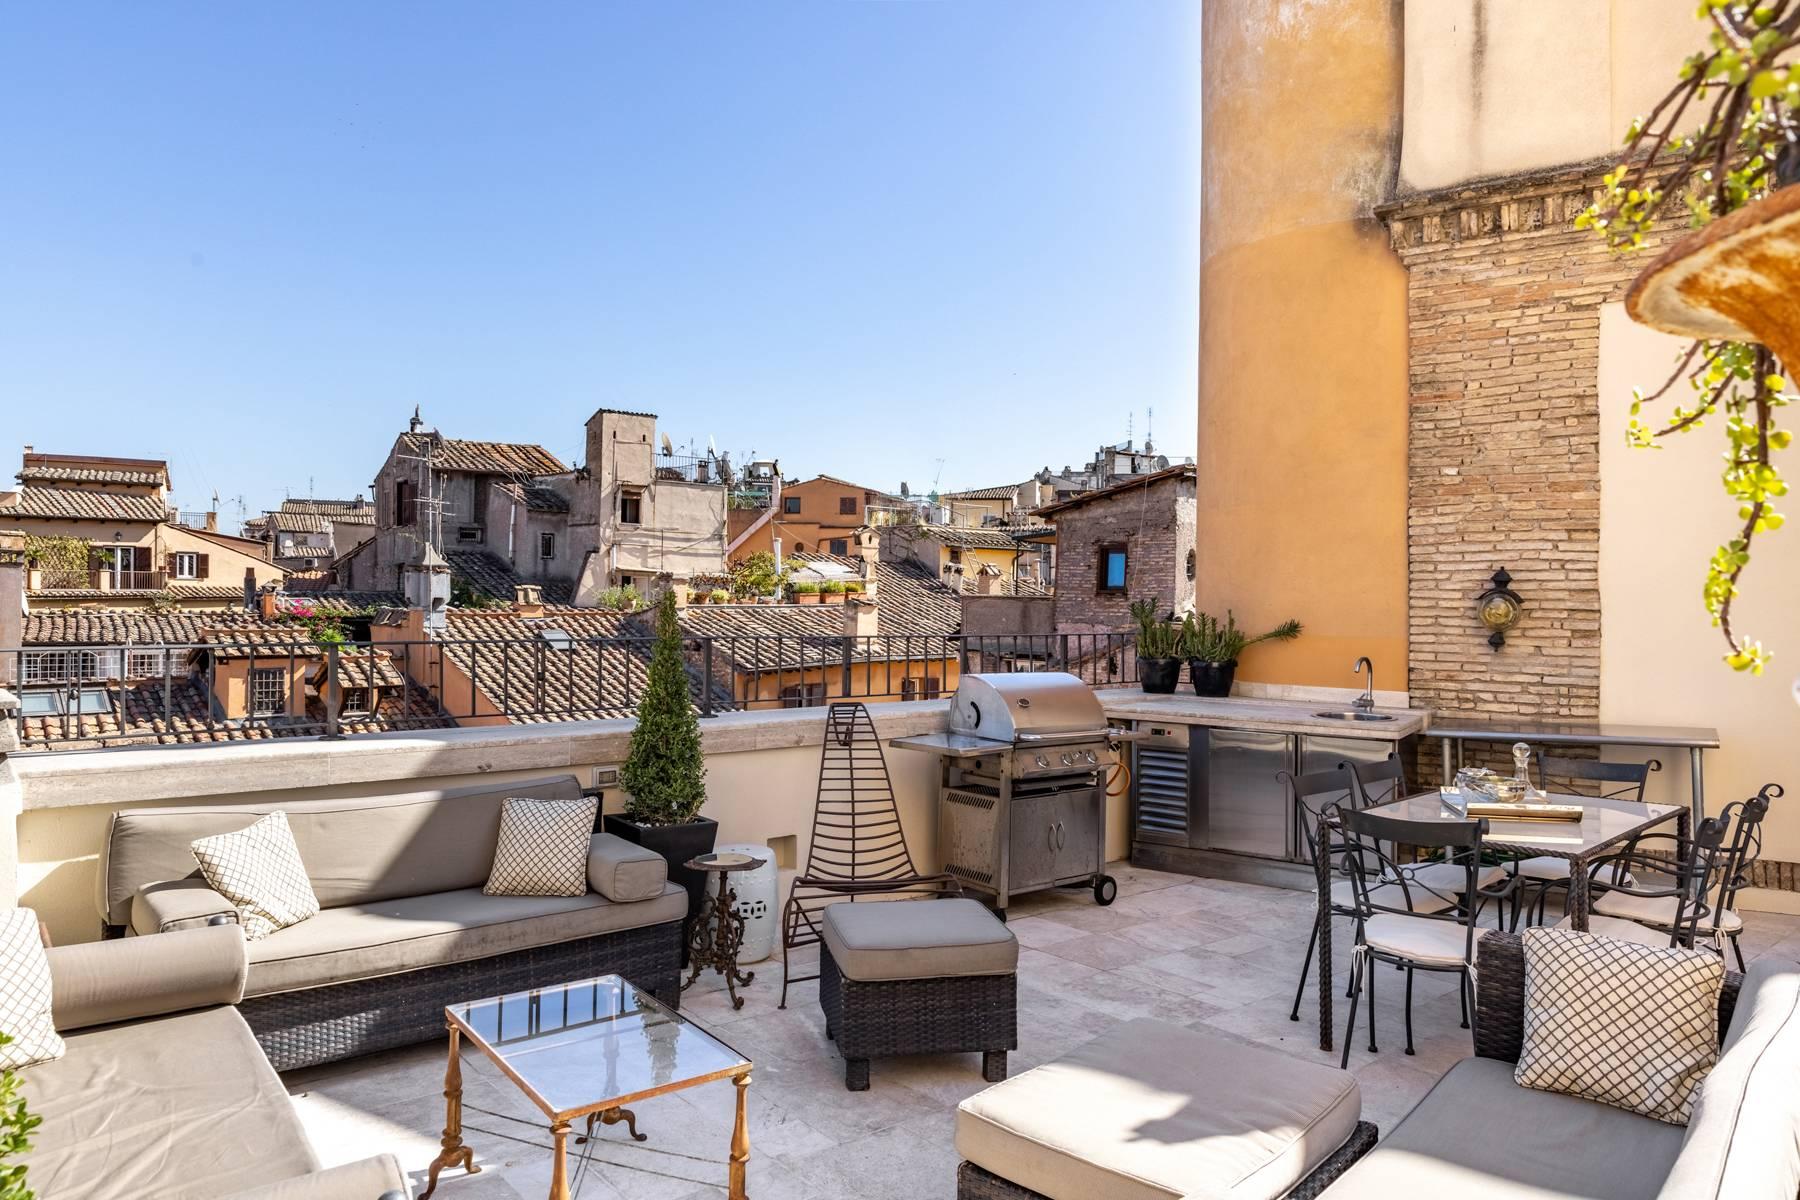 Apartment with terraces a stone's throw from Piazza Navona - 1